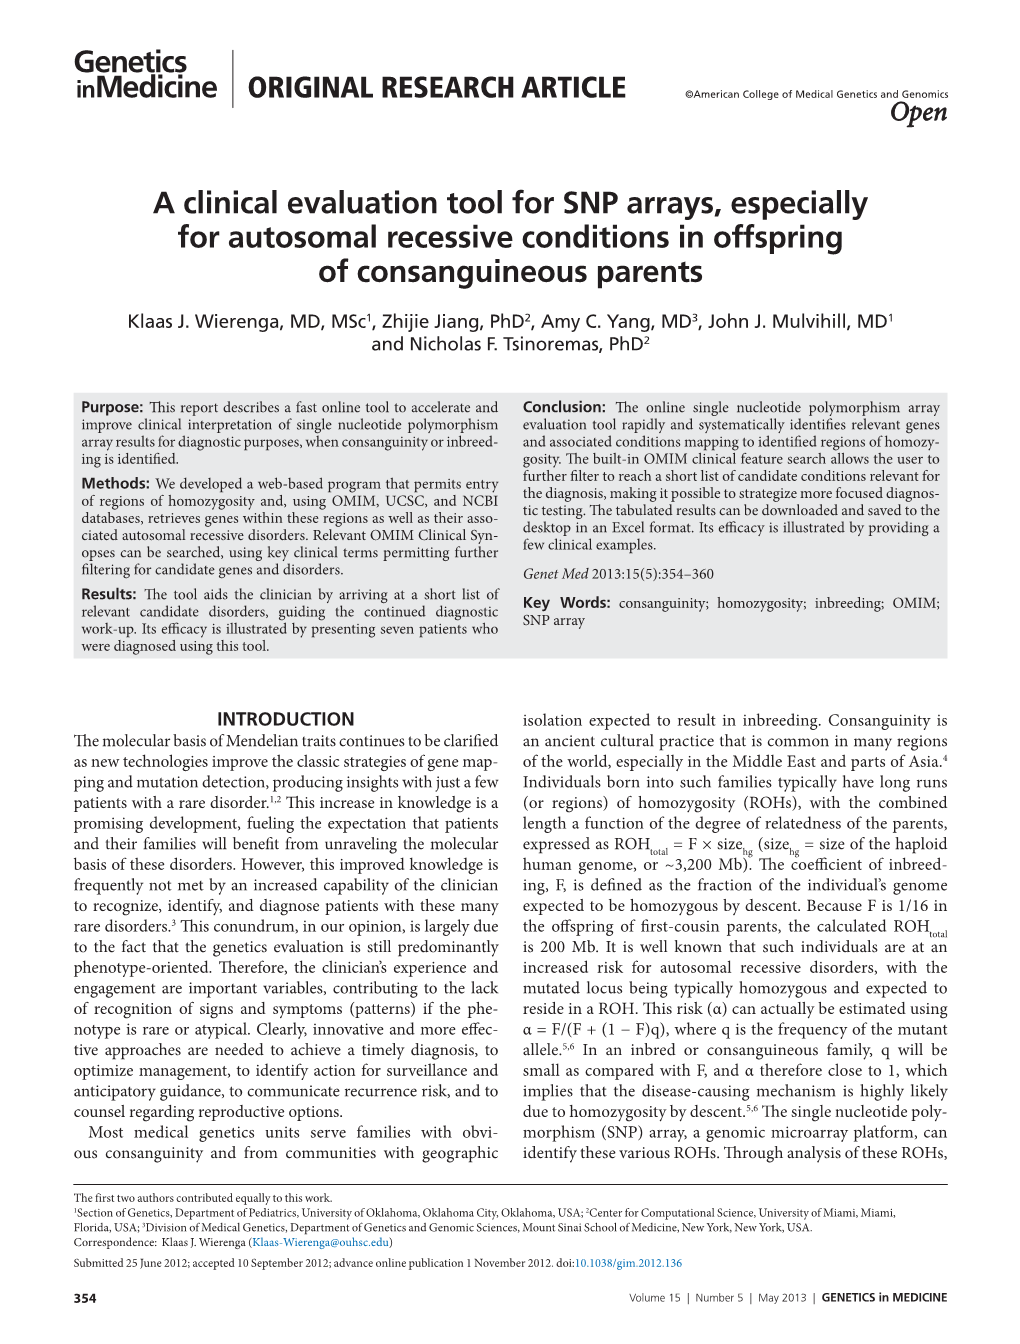 A Clinical Evaluation Tool for SNP Arrays, Especially for Autosomal Recessive Conditions in Offspring of Consanguineous Parents